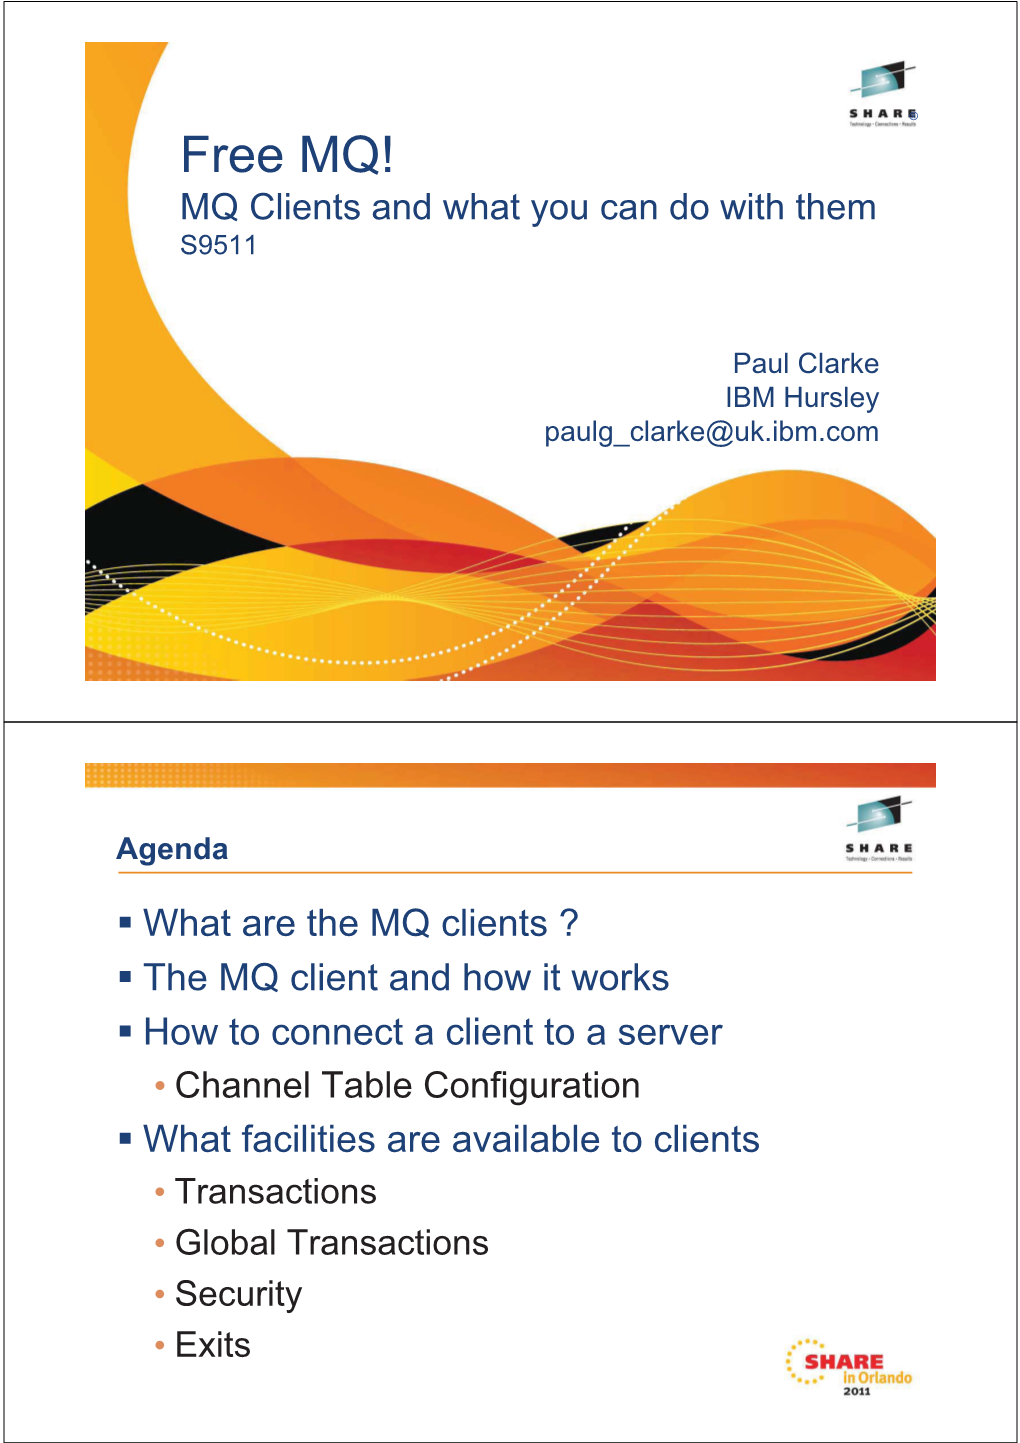 Free MQ! MQ Clients and What You Can Do with Them S9511